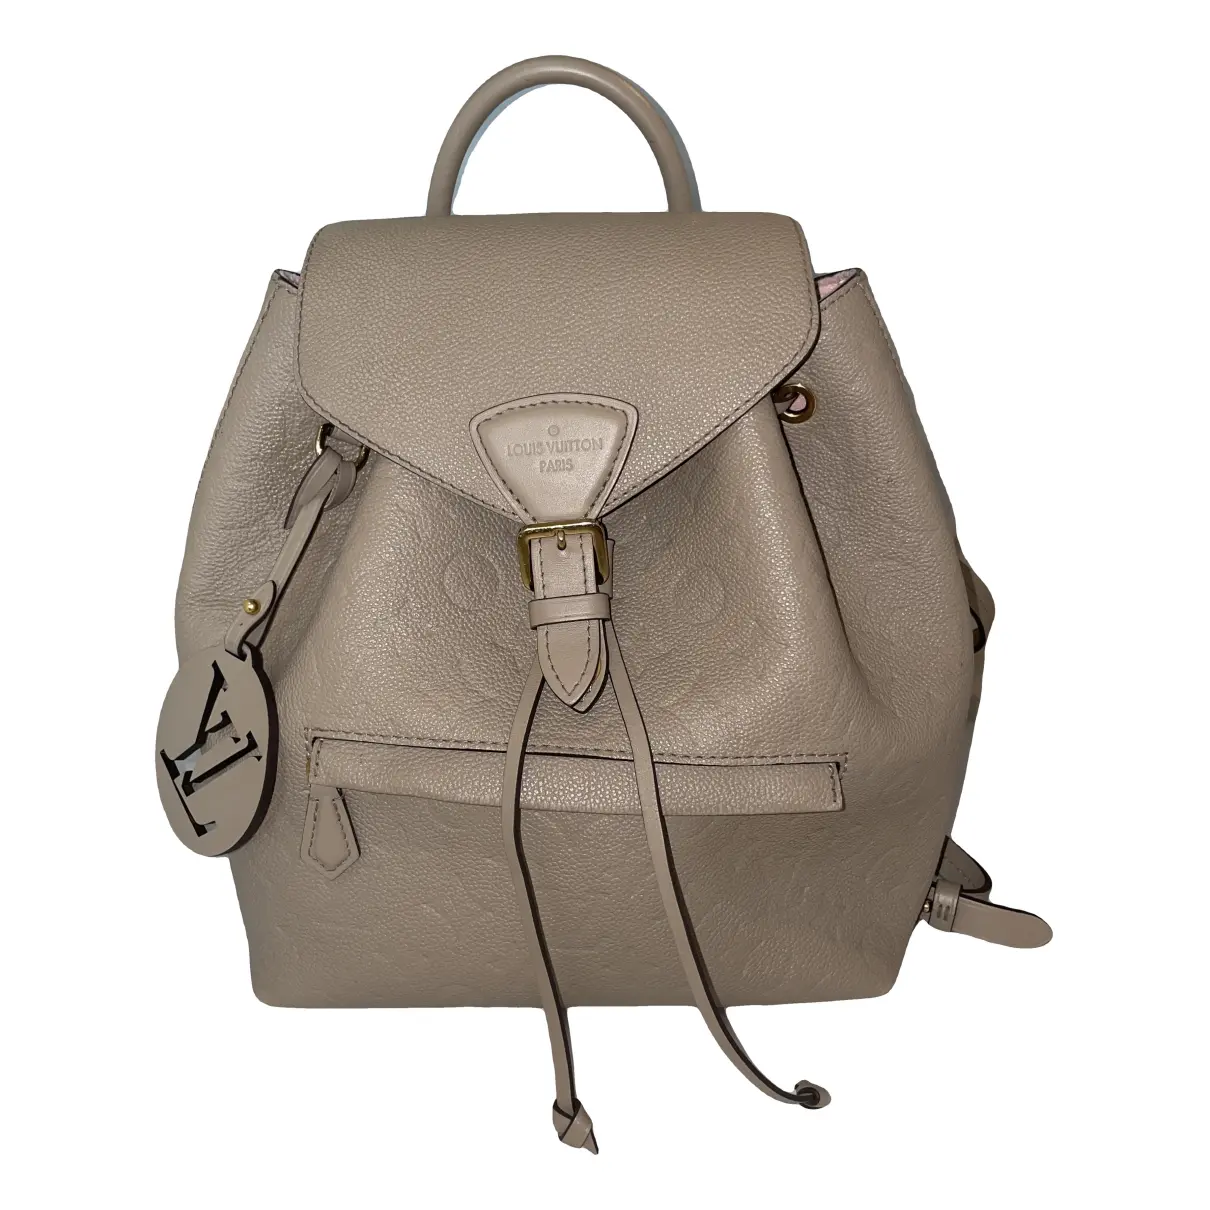 Montsouris leather backpack